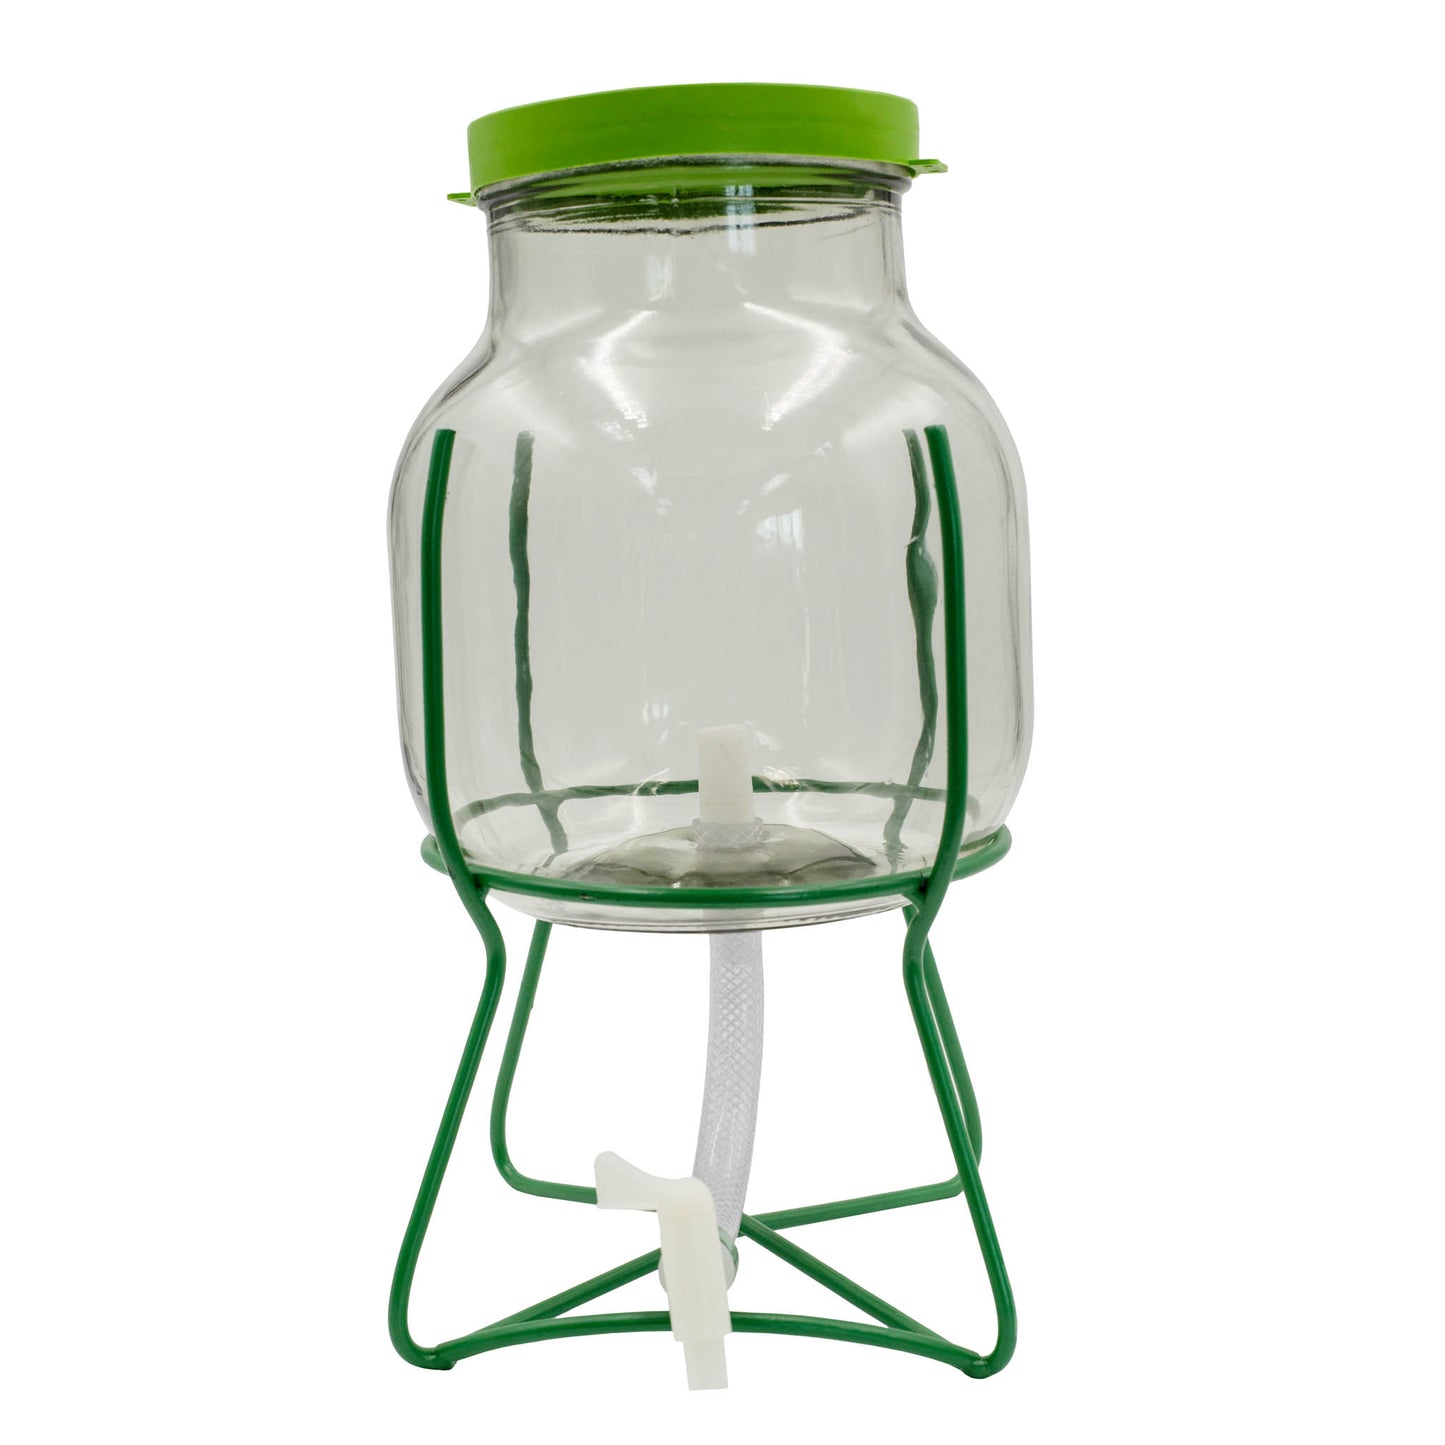 Demijohn 5Lt Wide Neck with Iron Frame & Tap for storing and dispensing vinegar or water.